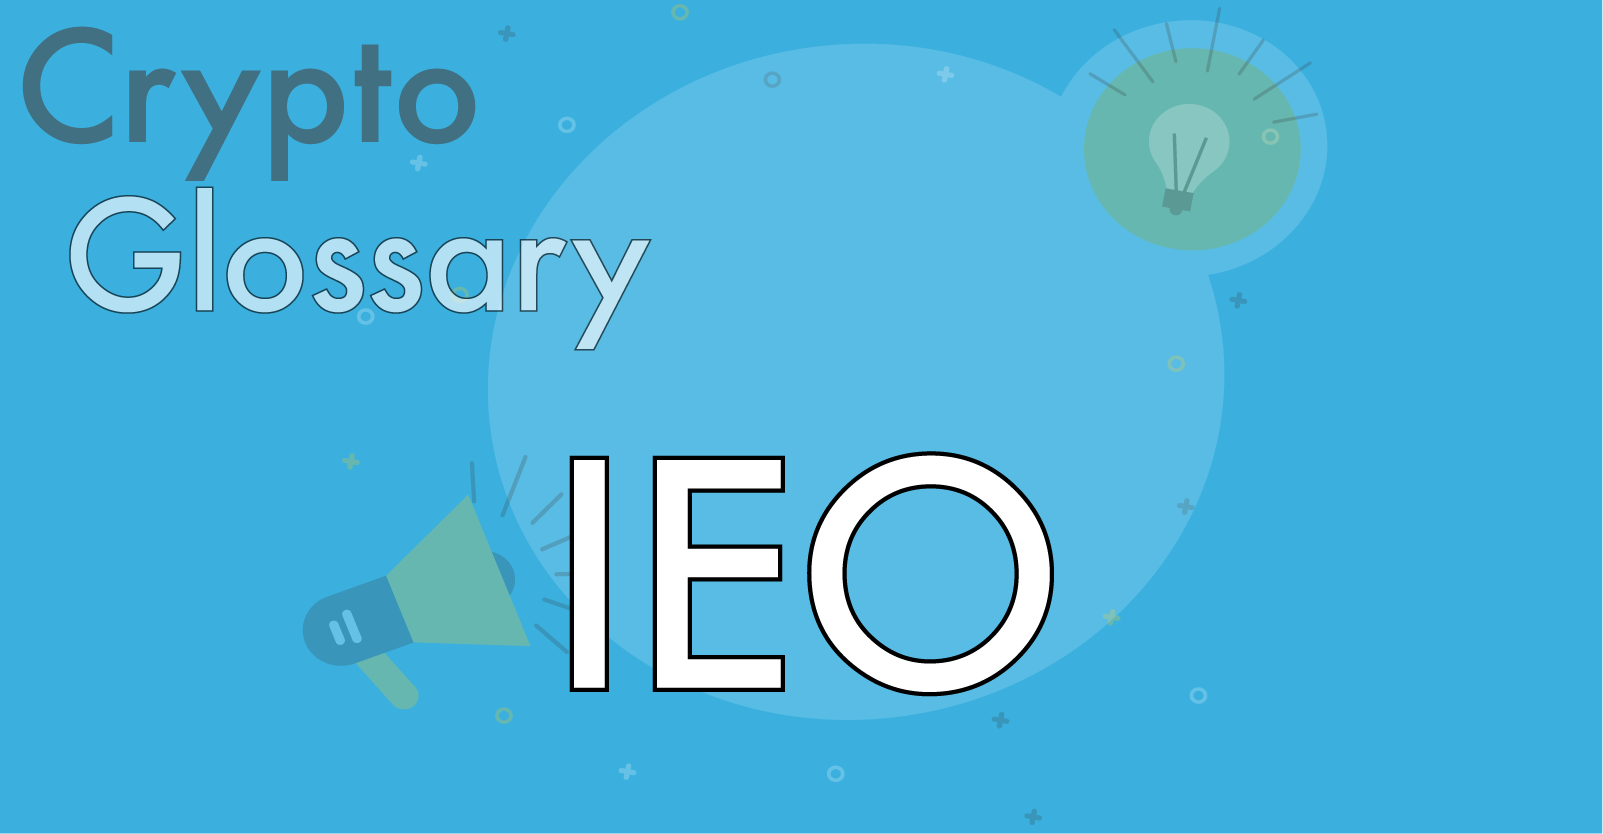 What is an IEO and how is it different from an ICO?